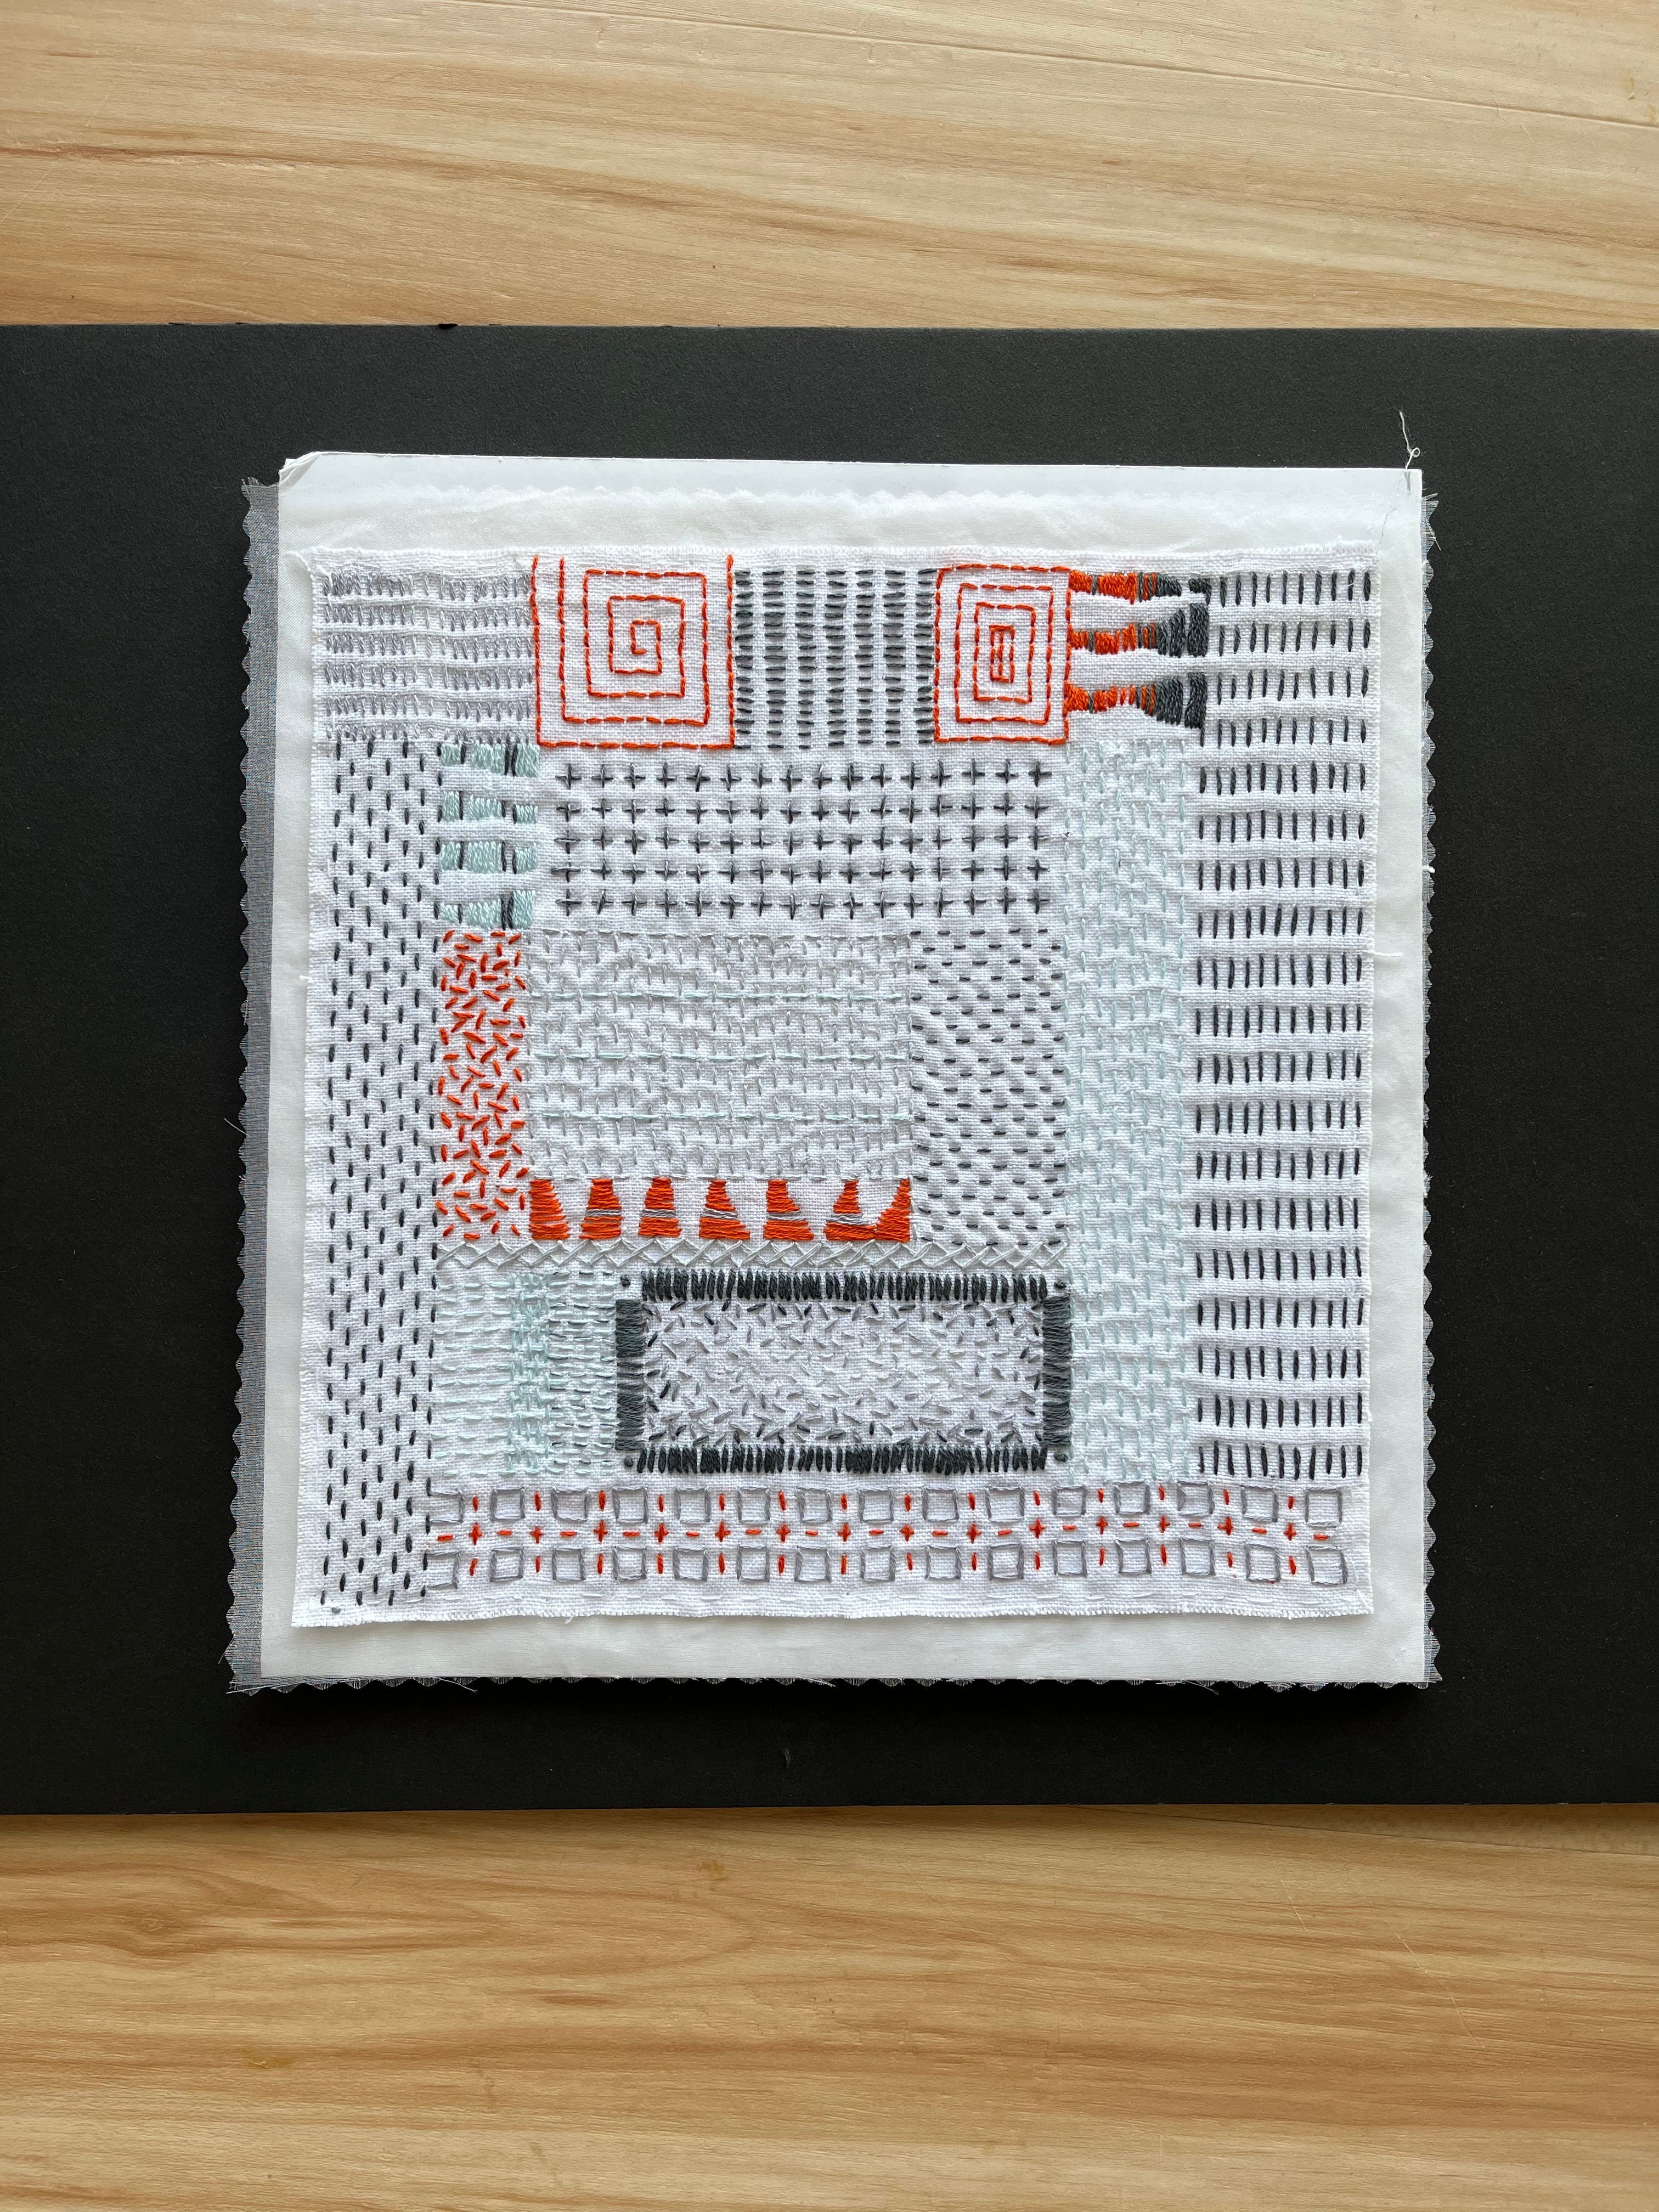 Intro to Japanese Boro Stitching workshop with April Sproule